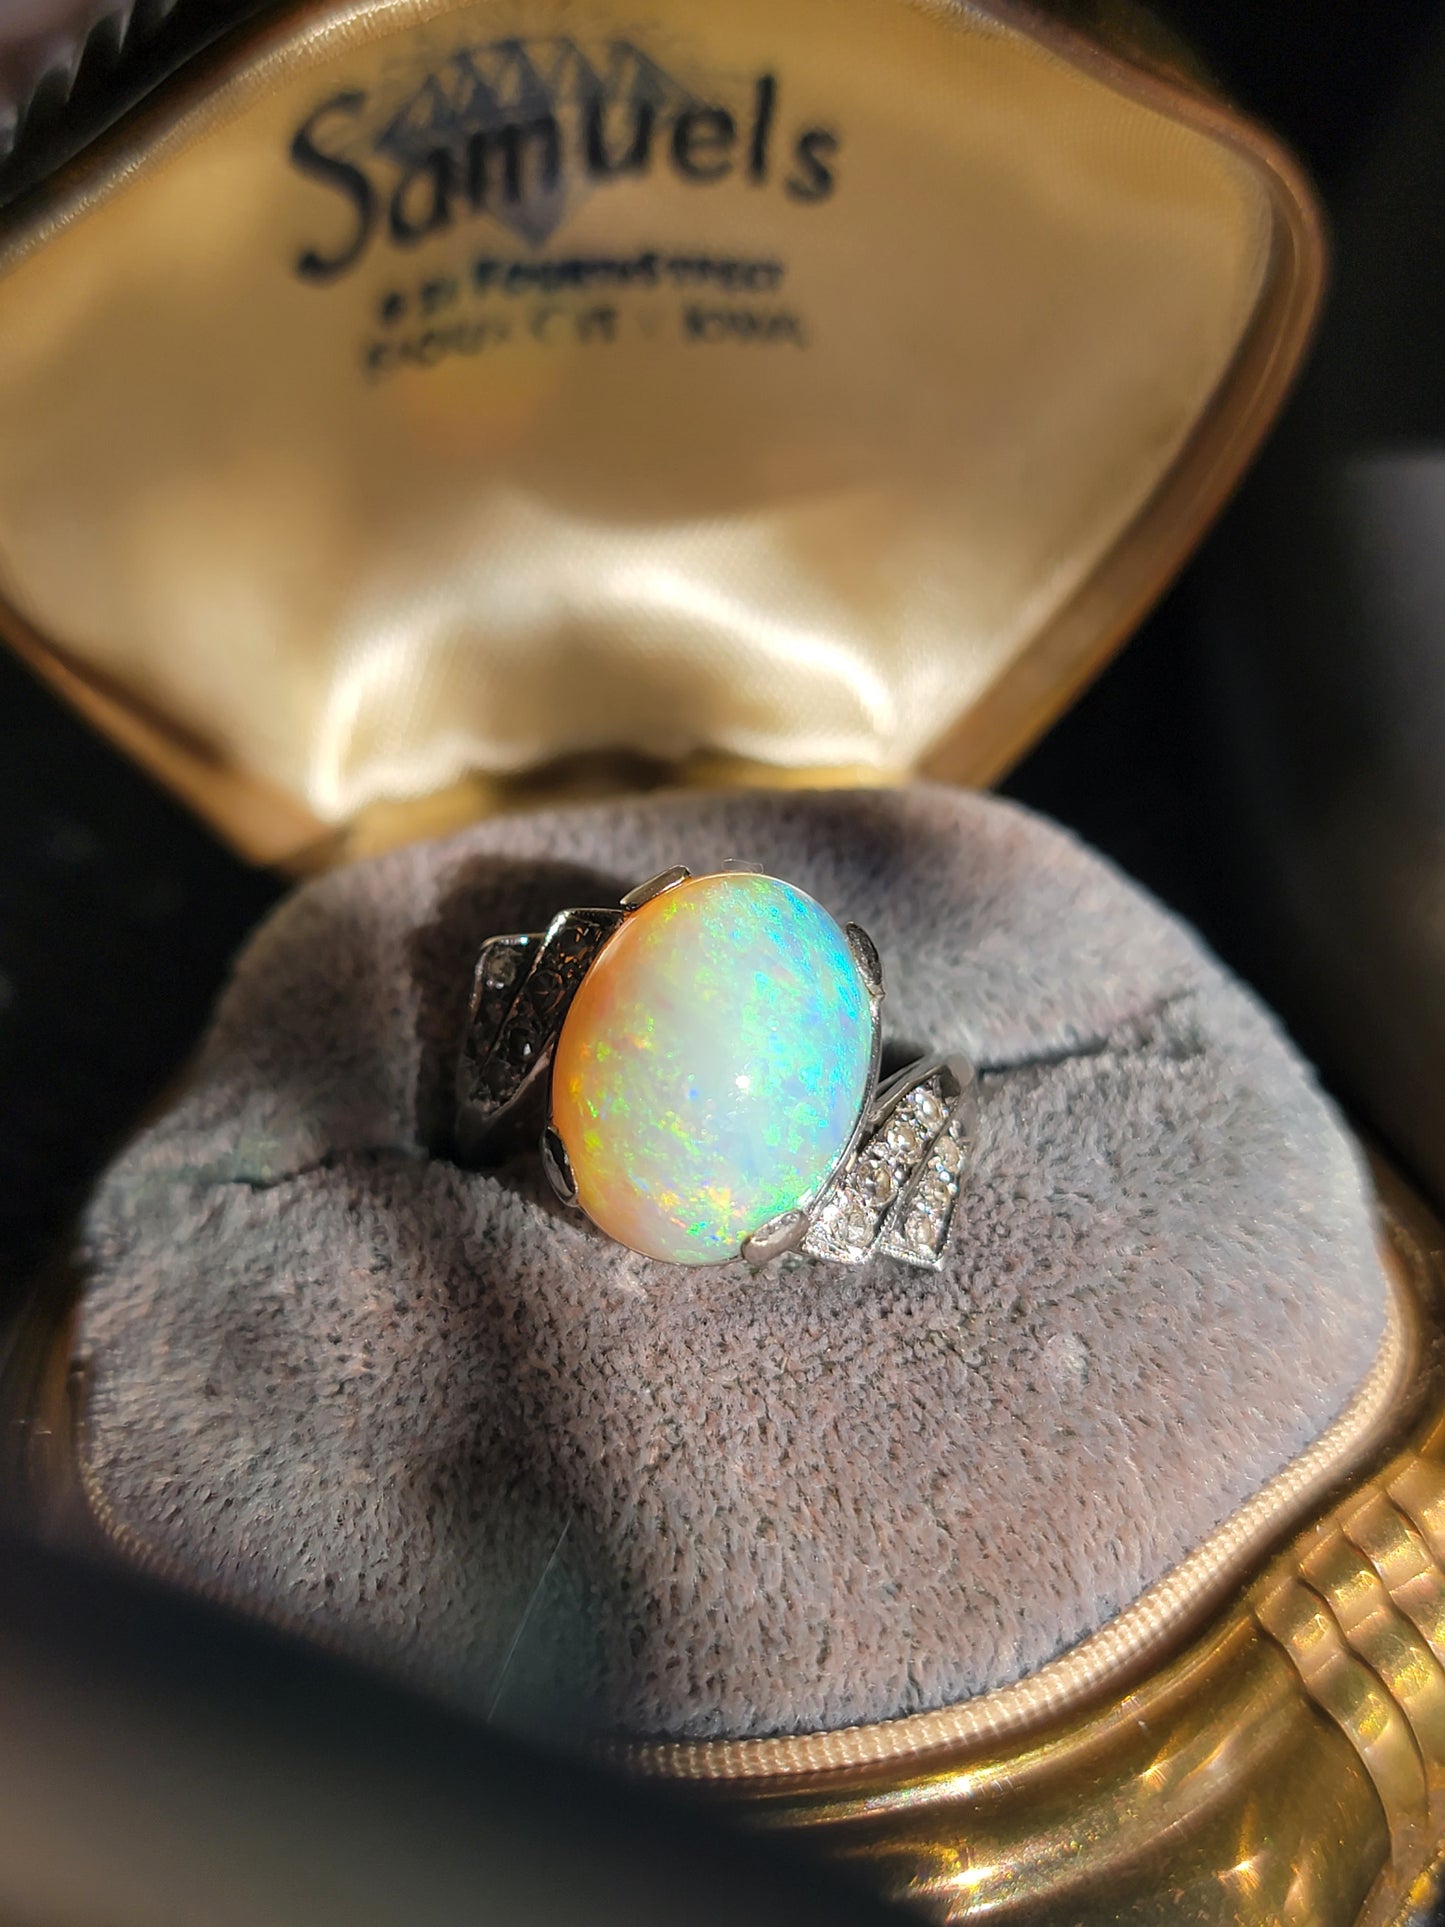 Words really cannot begin to describe this kaleidoscopic Opal. A whopper of an oval cab, set in a 14kt bypass setting with diamonds. Likely custom made in the 1940's. The setting reminds me of a pilot's wings.